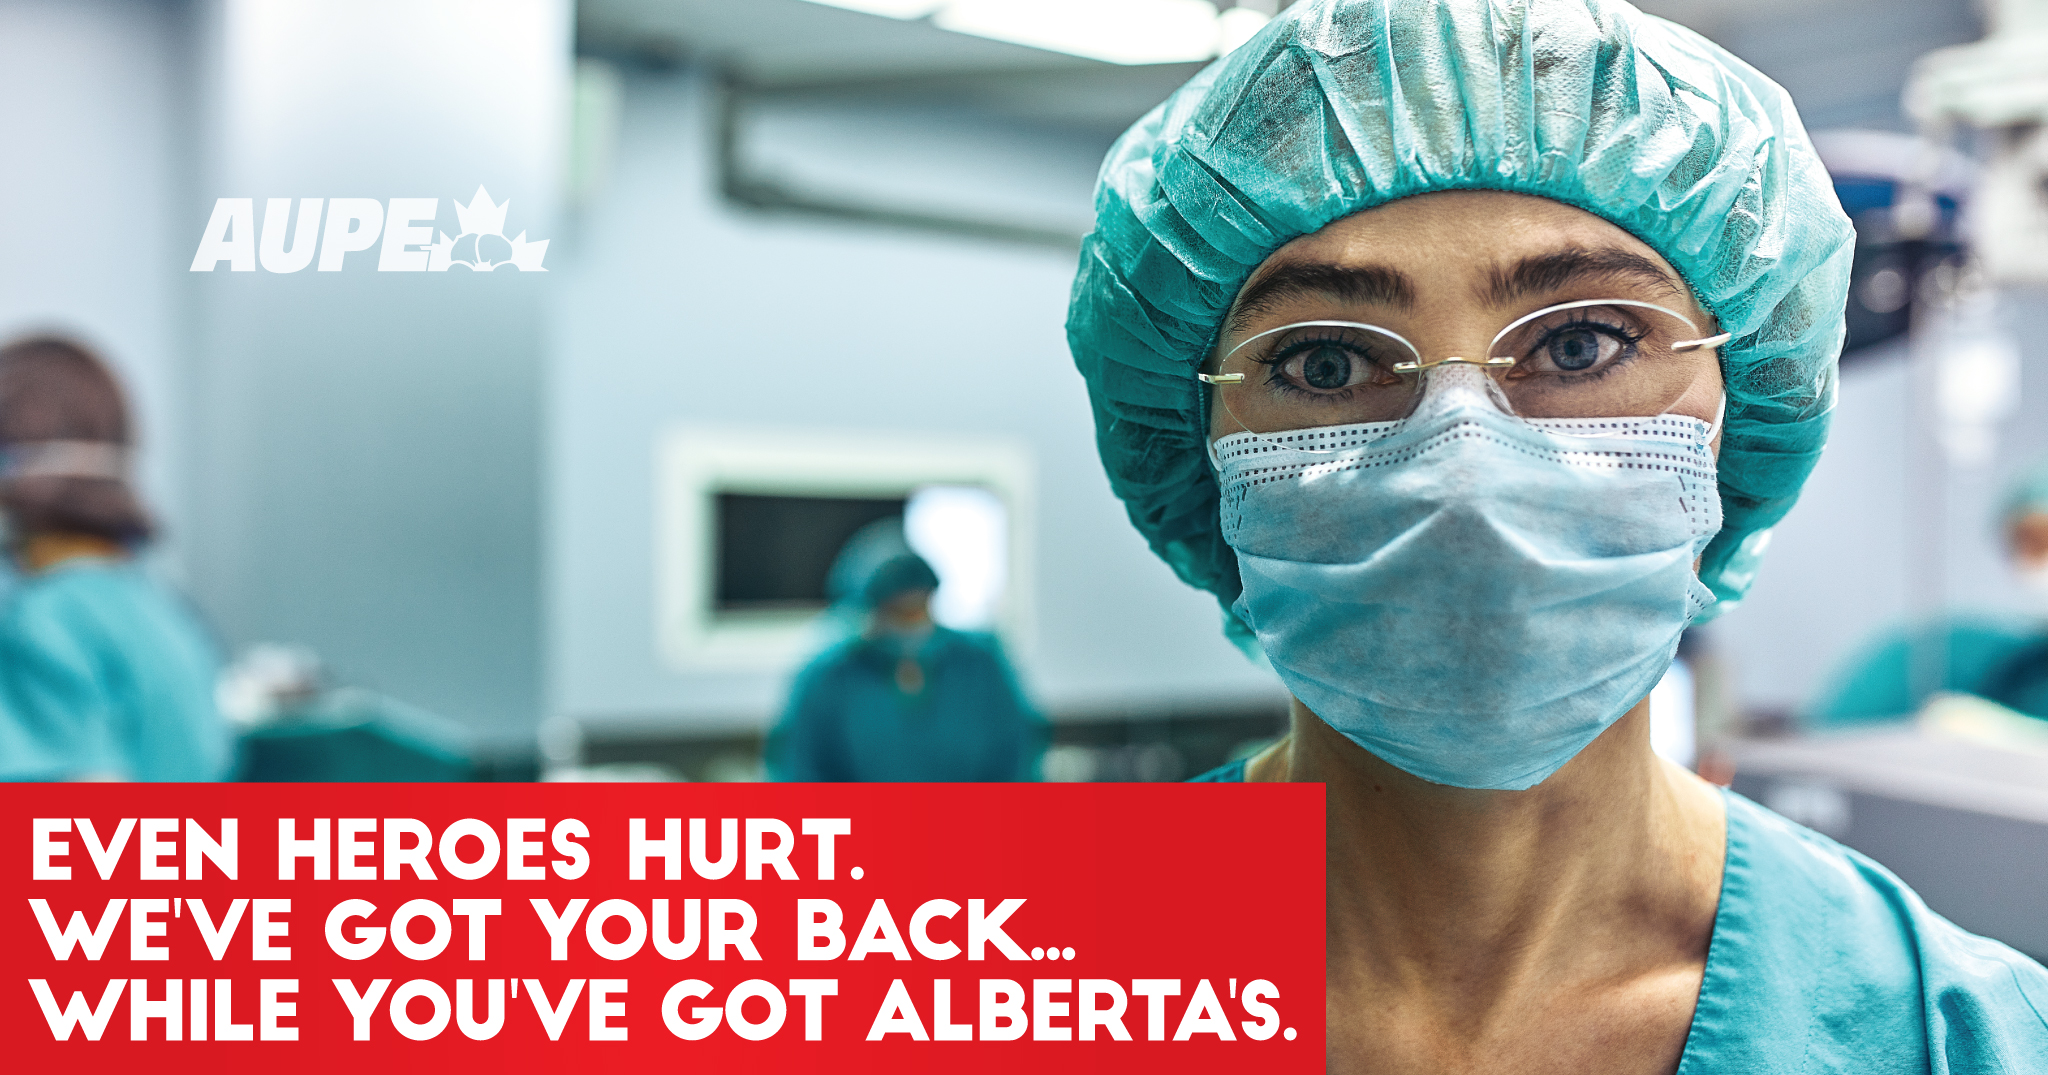 Even heroes hurt. We've got your back... while you've got Alberta's.